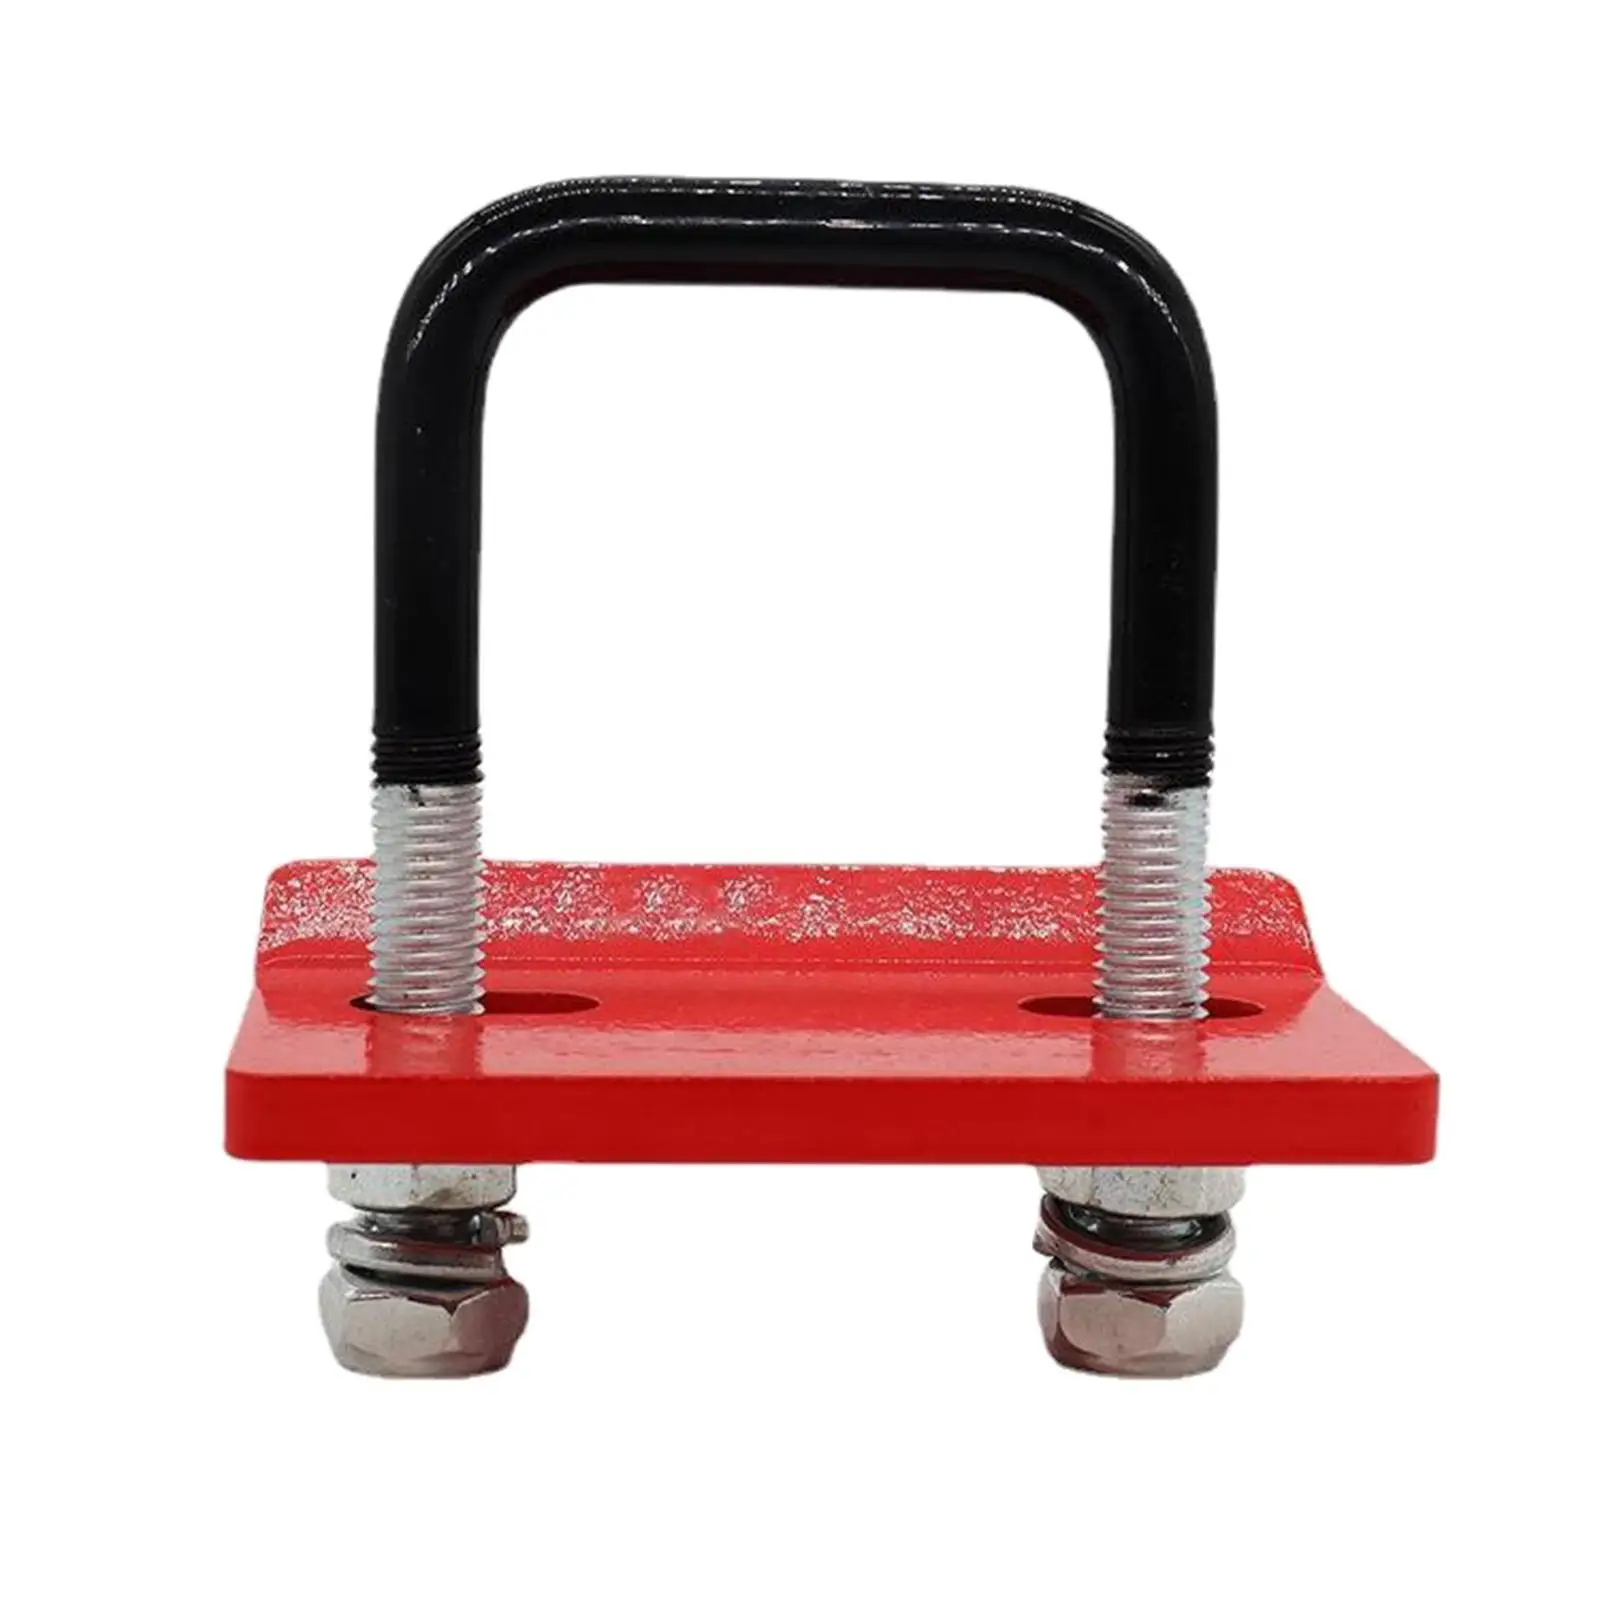 Alloy Steel Hitch Tightener Universal Protective Anti Rust Coating Lock Down Tow Clamp for Trailer Hitch Tray Bike Rack